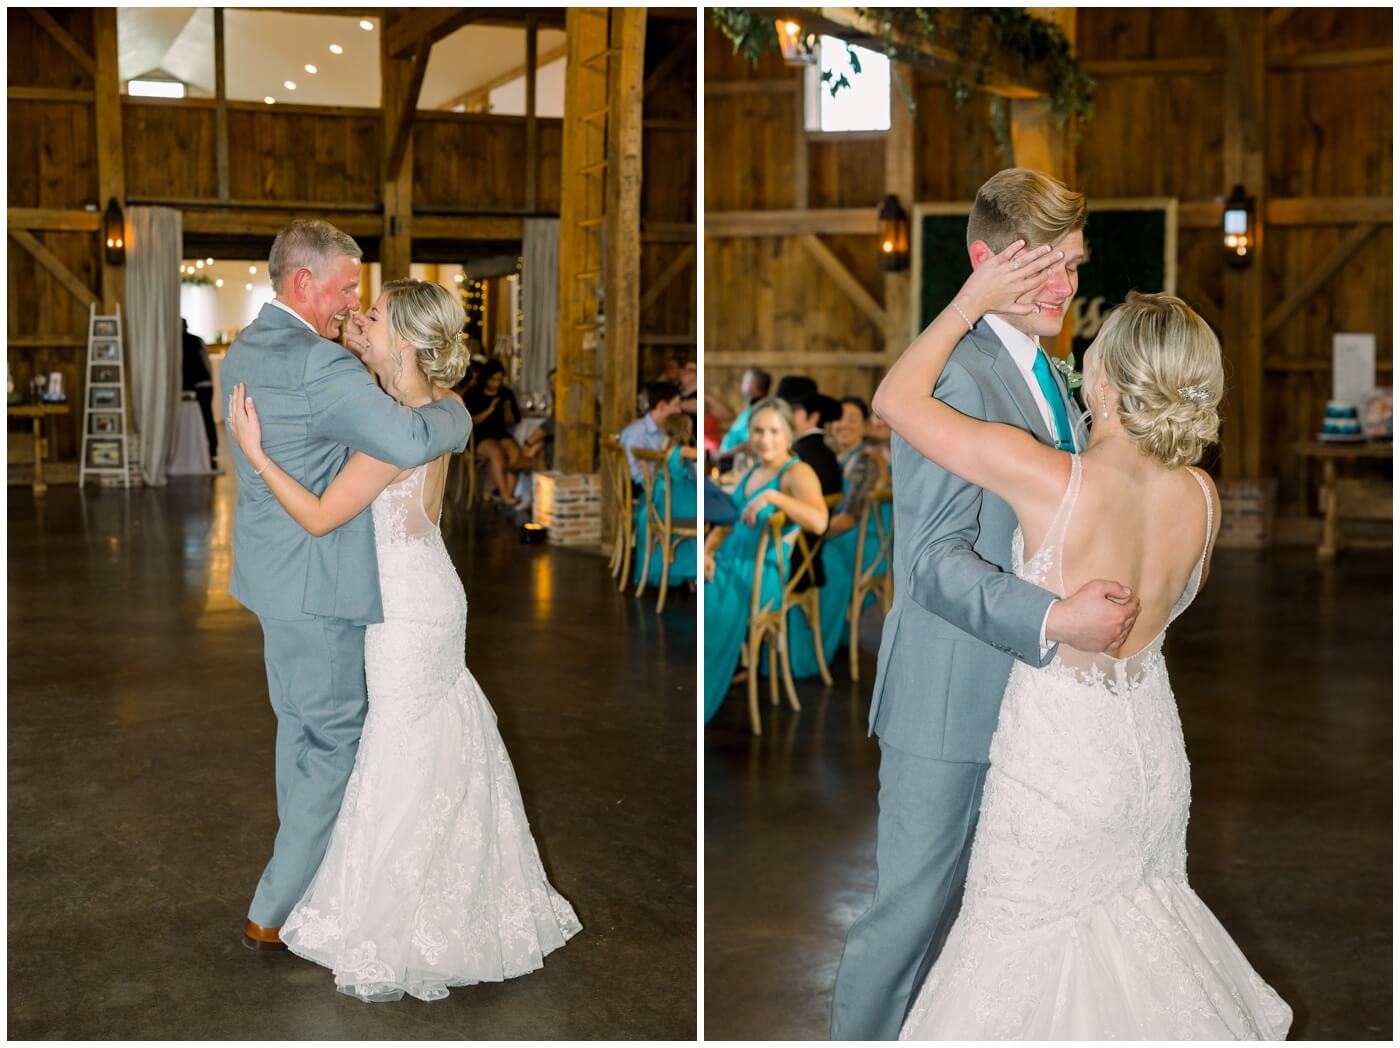 The bride shares a sweet dance with her father and twin brother on her wedding day